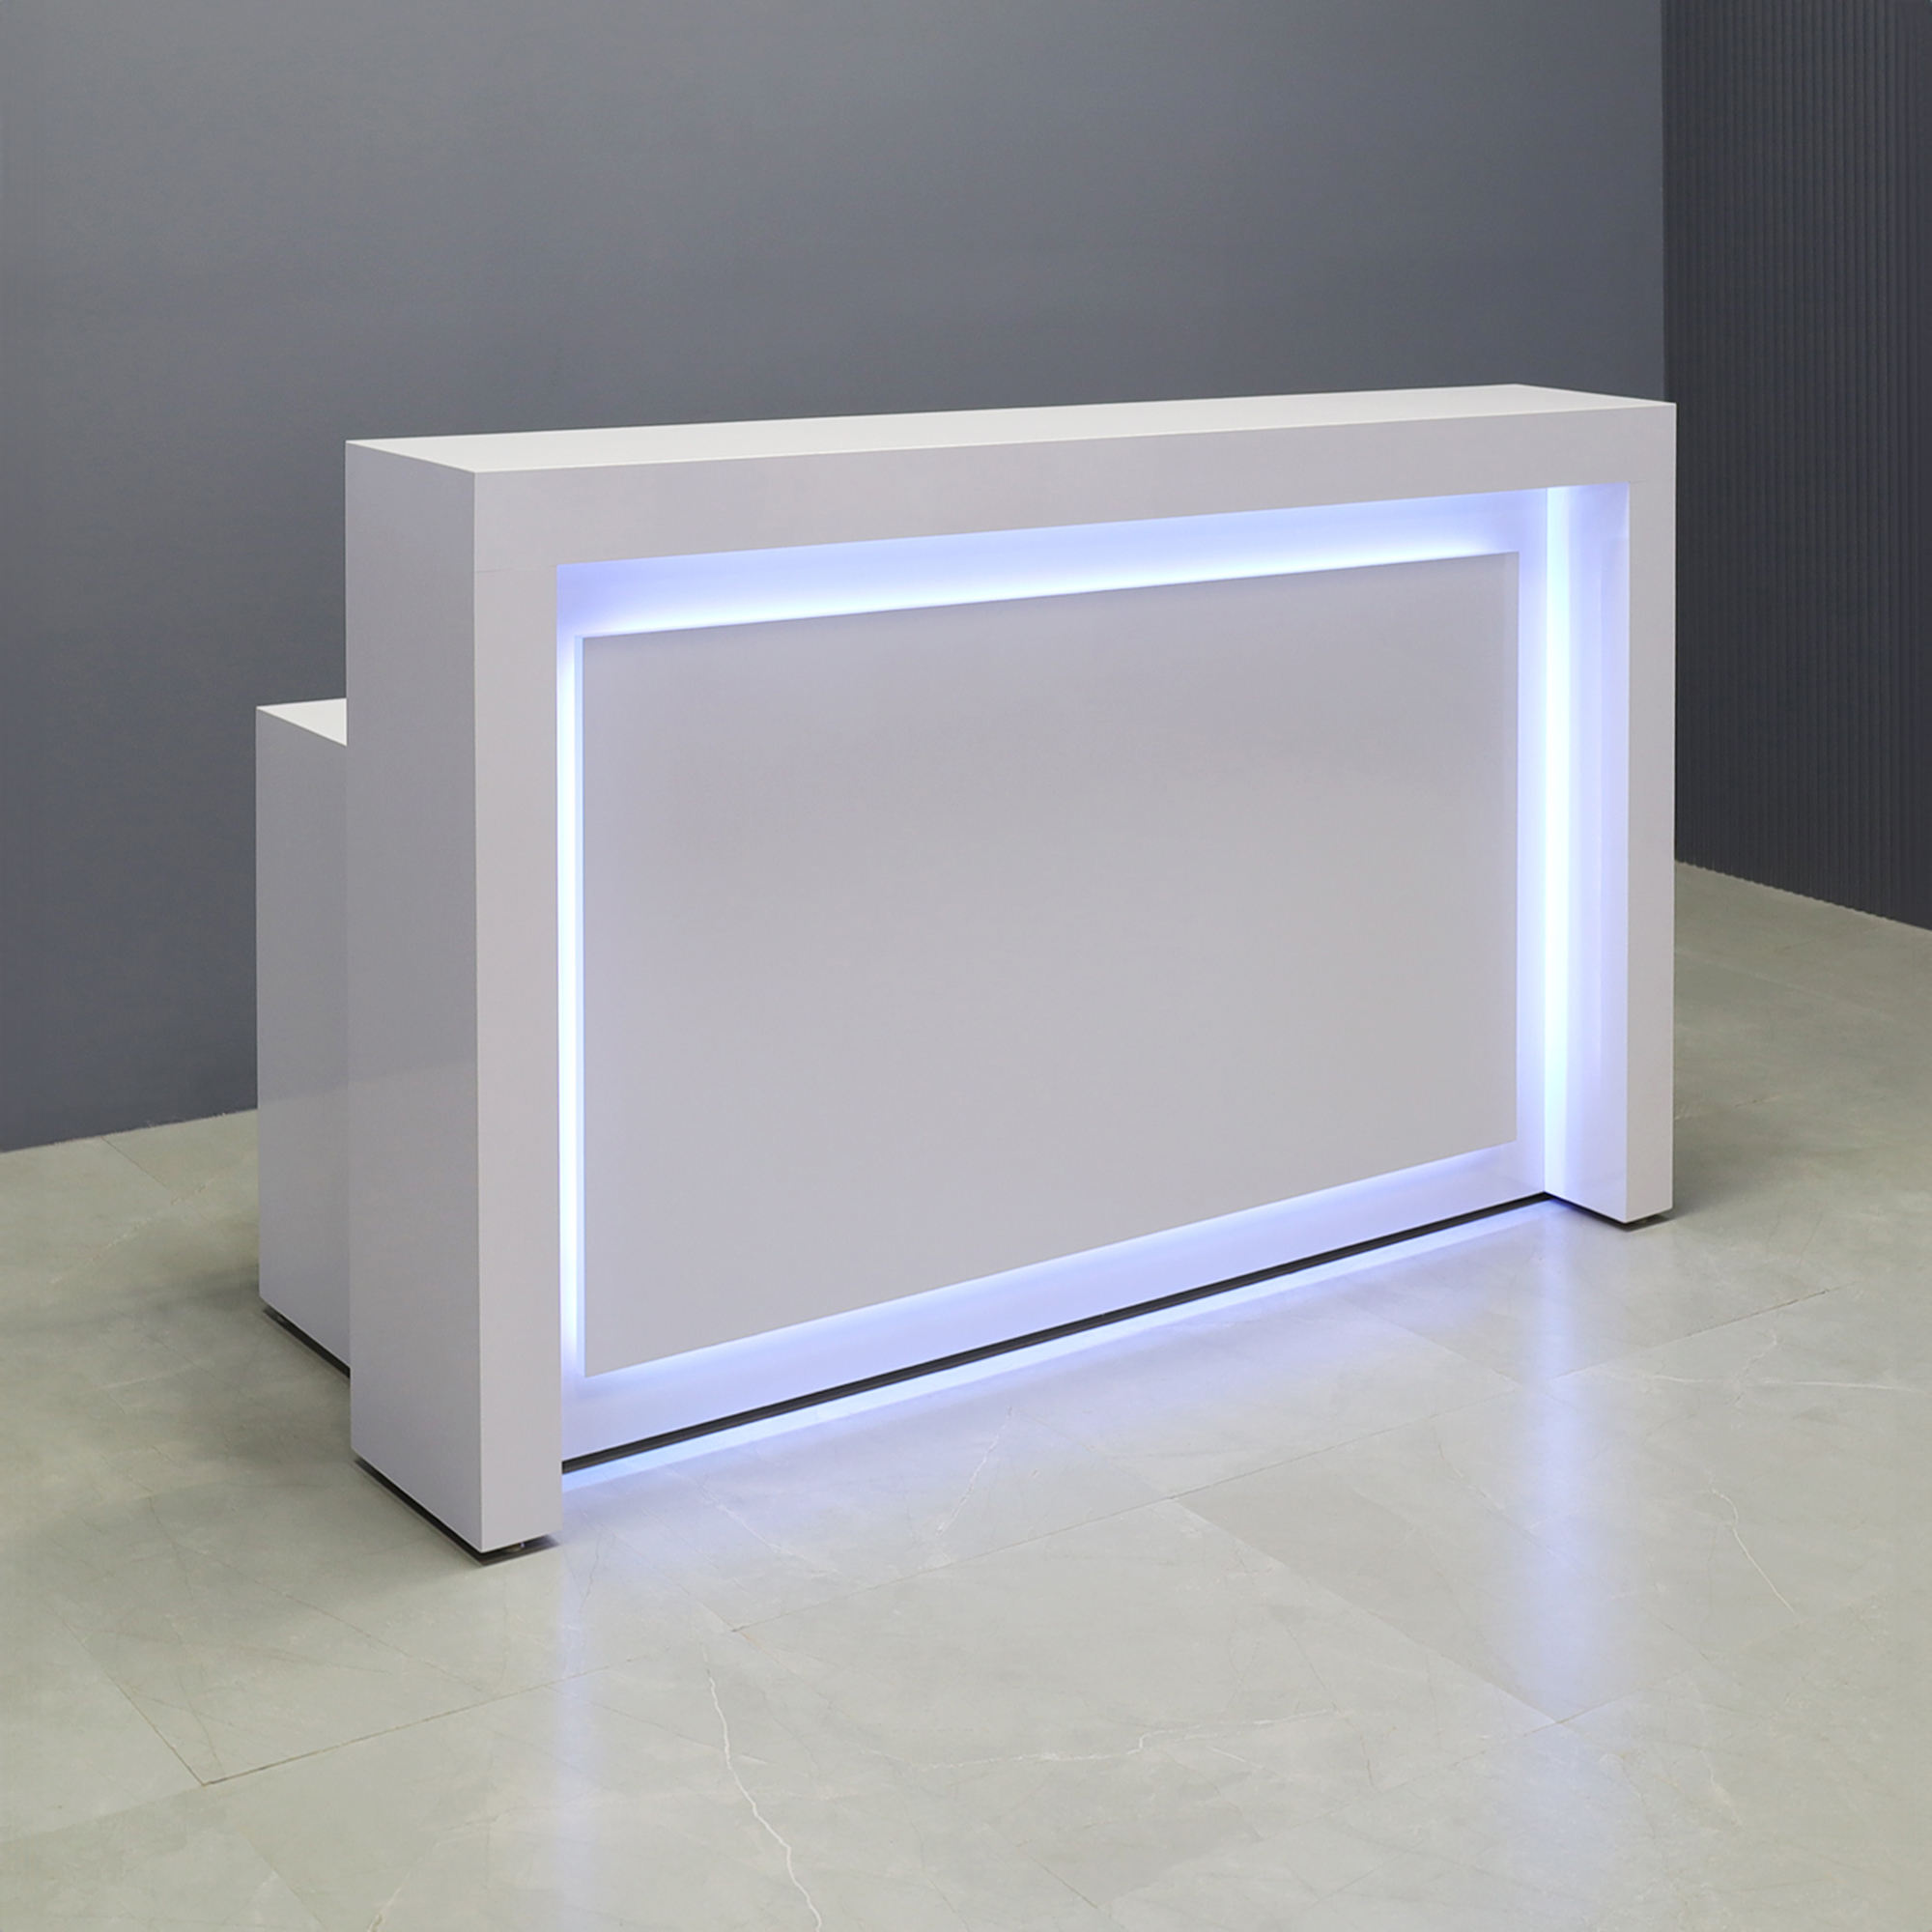 60-inch New York Straight Reception Desk in white gloss laminate finish, with multi-colored LED, shown here.